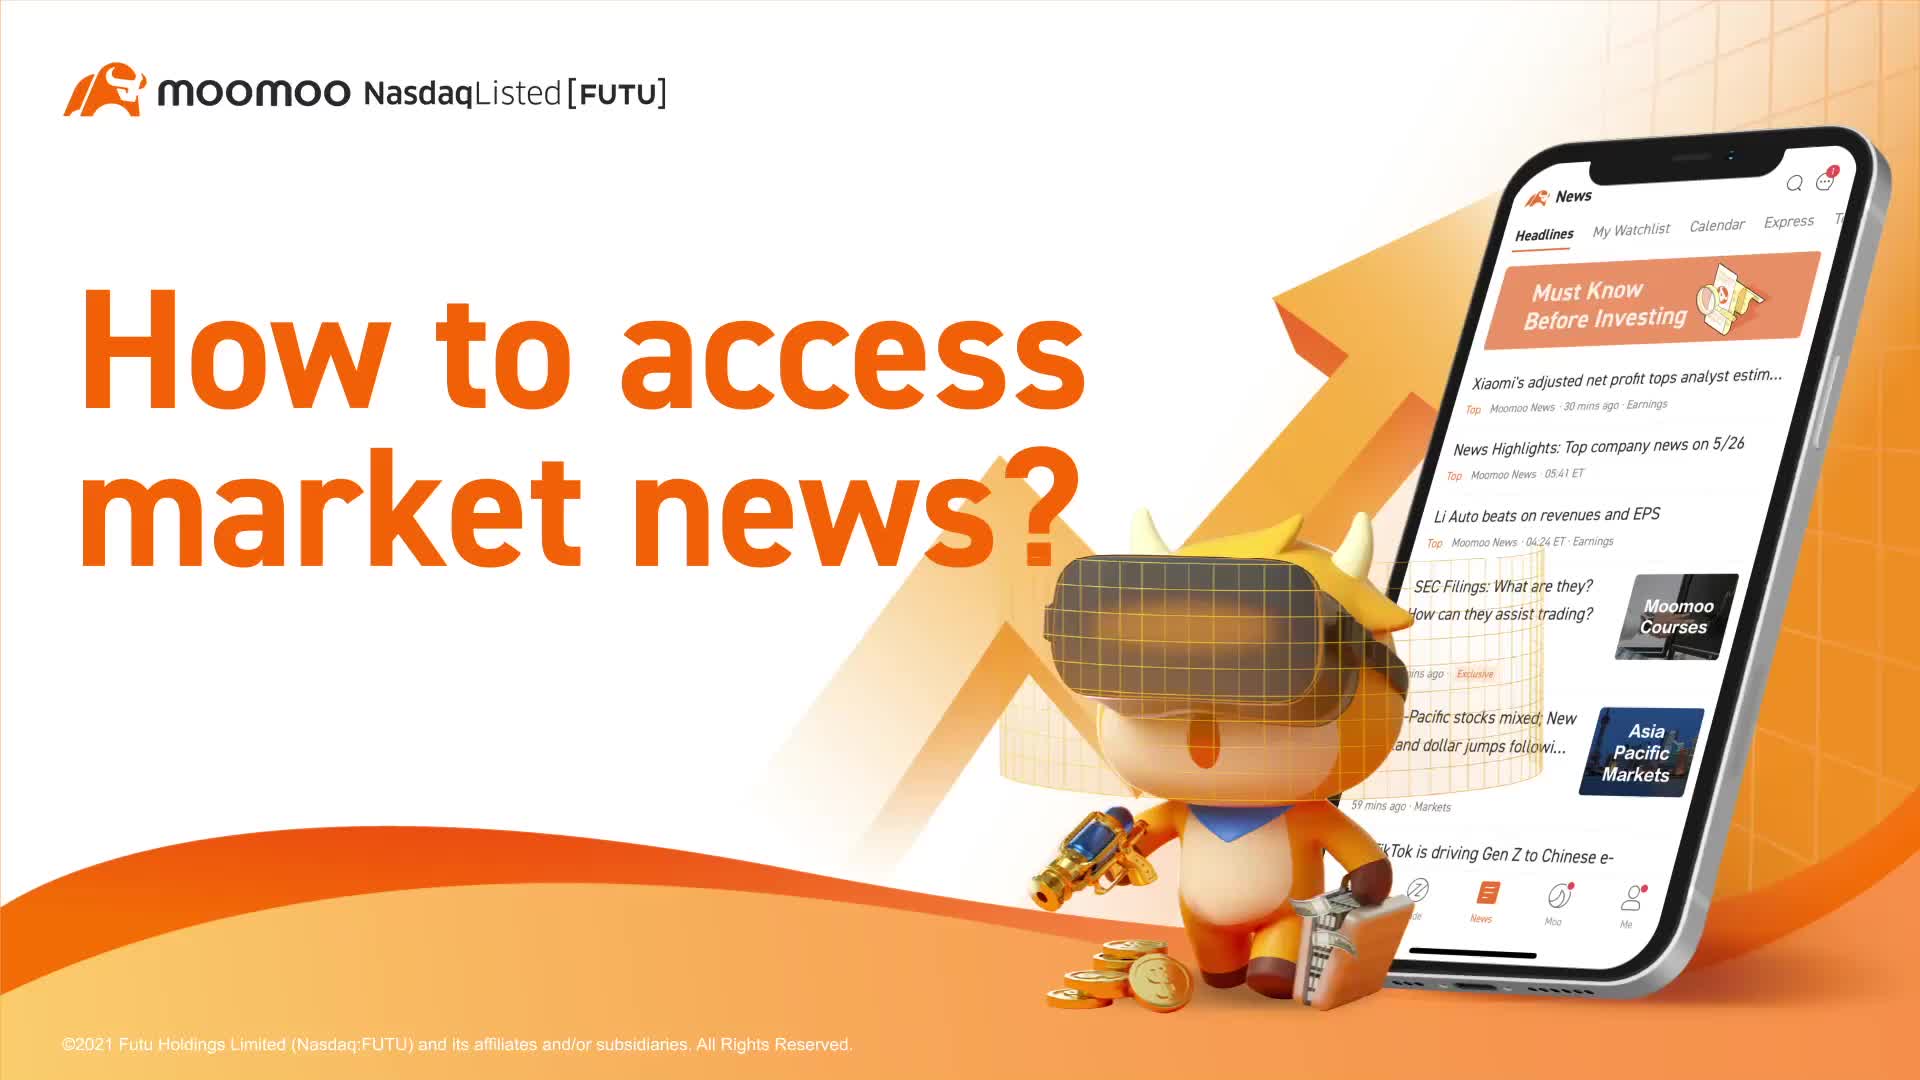 Investing Hacks: News drives markets up and down. How to access free news?